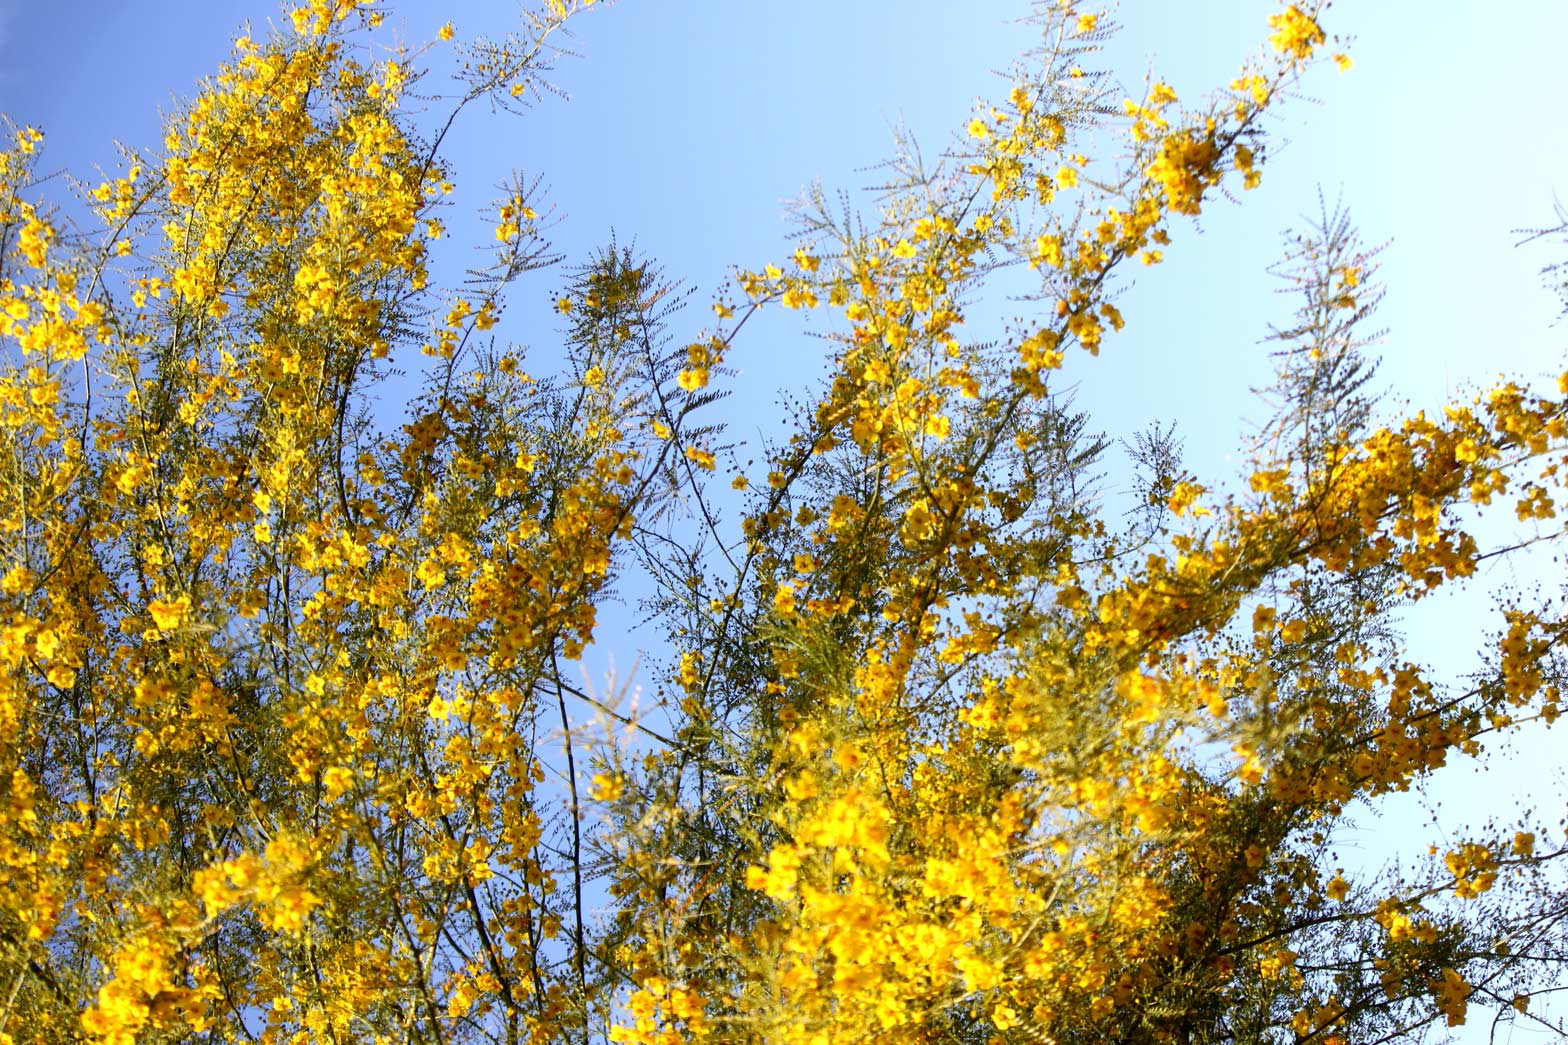 Palo Verde branches full of yellow blooms against a bright blue sky.